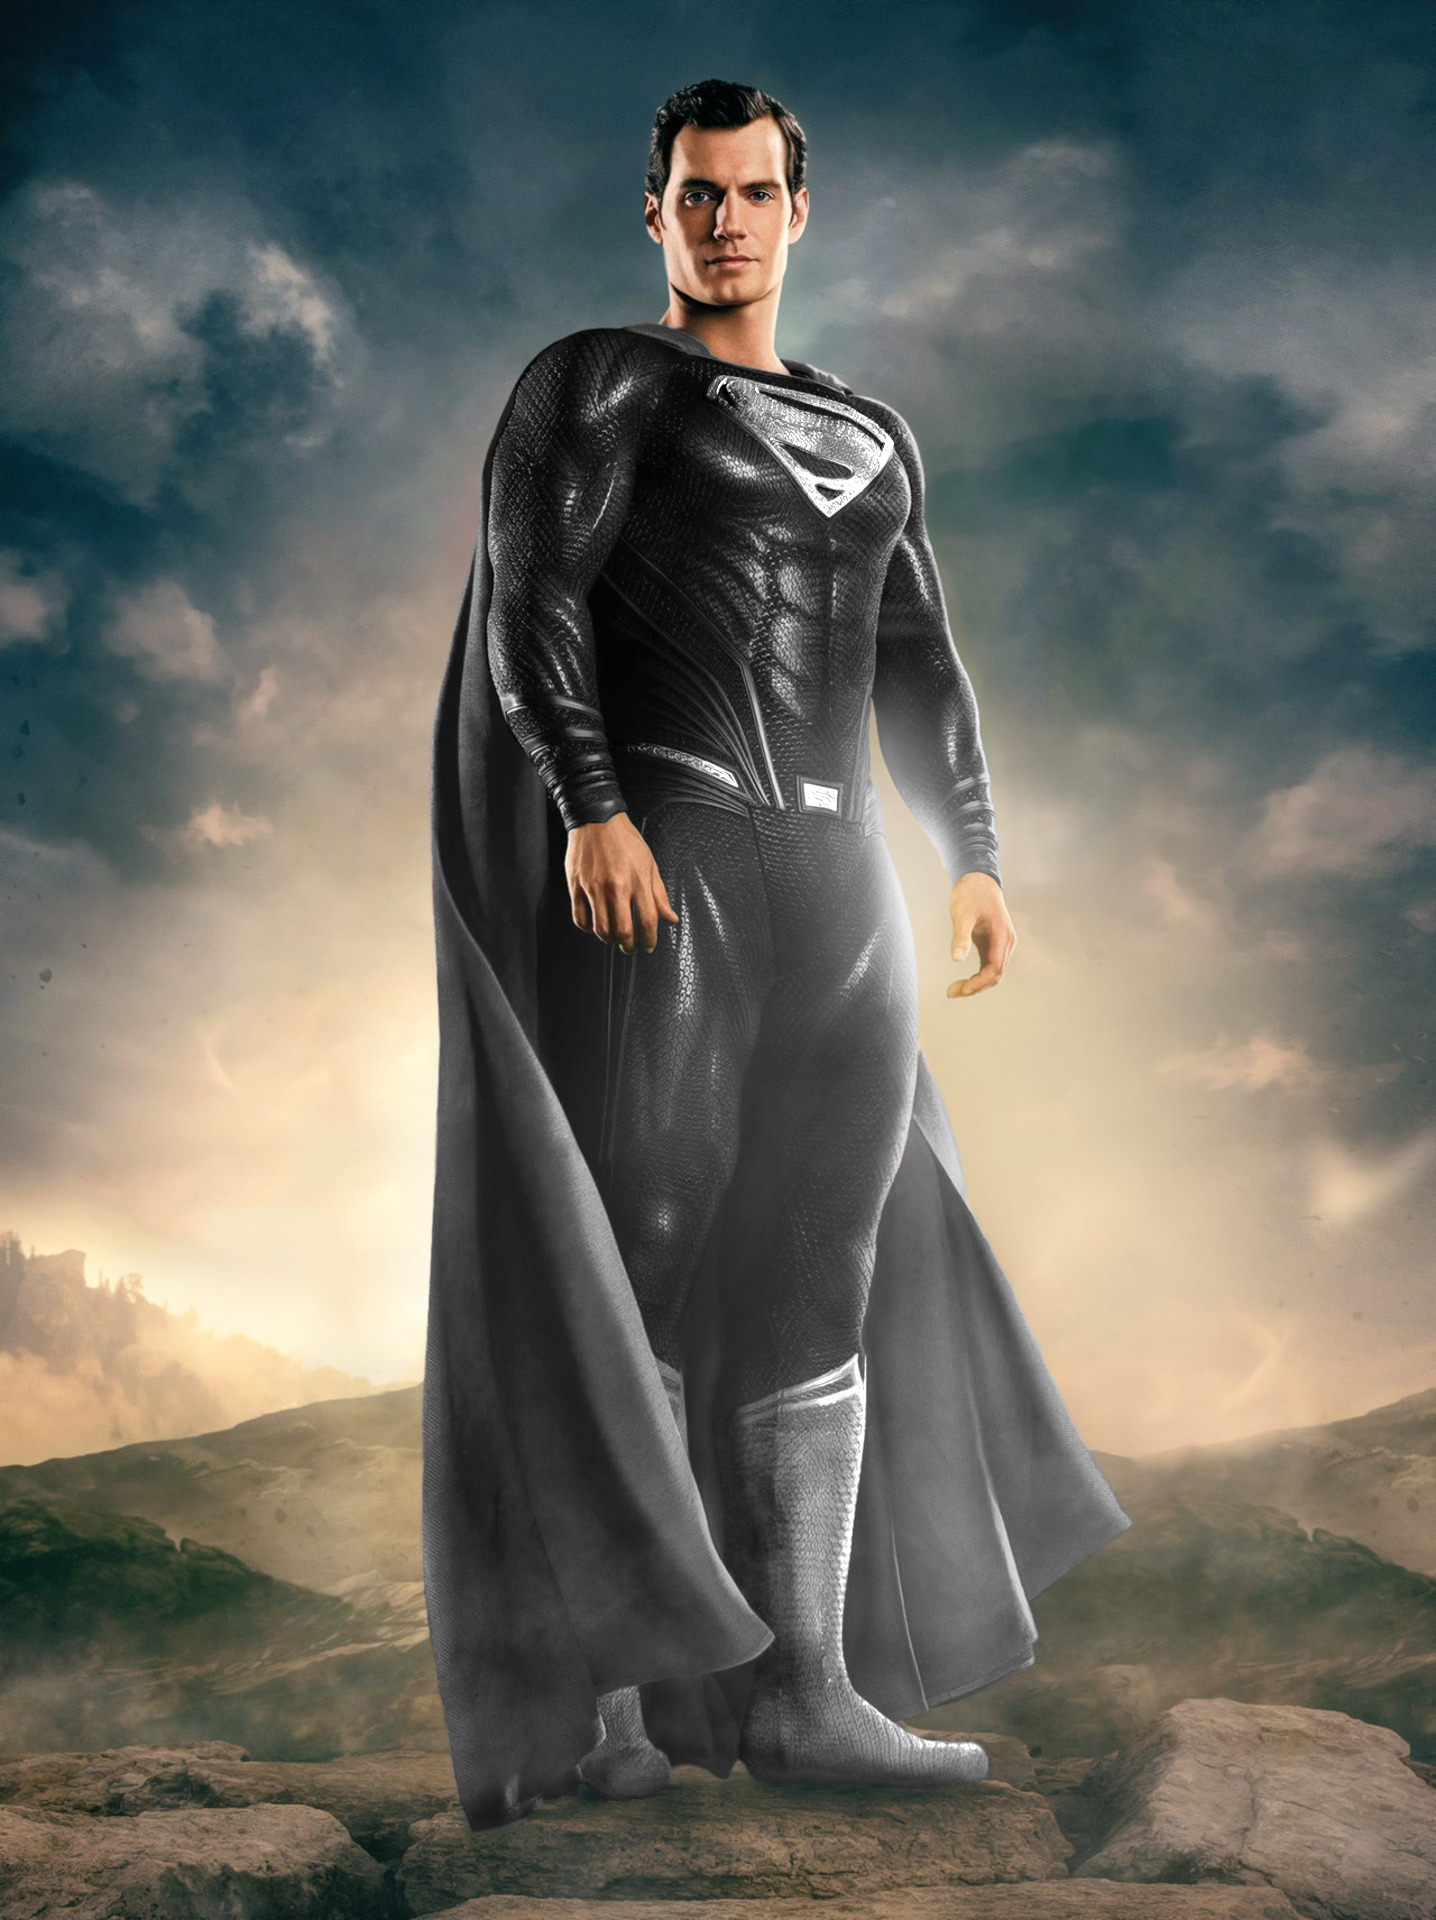 FANMADE: Black Suit Superman! Edited using the JL Superman poster as base., DC_Cinematic